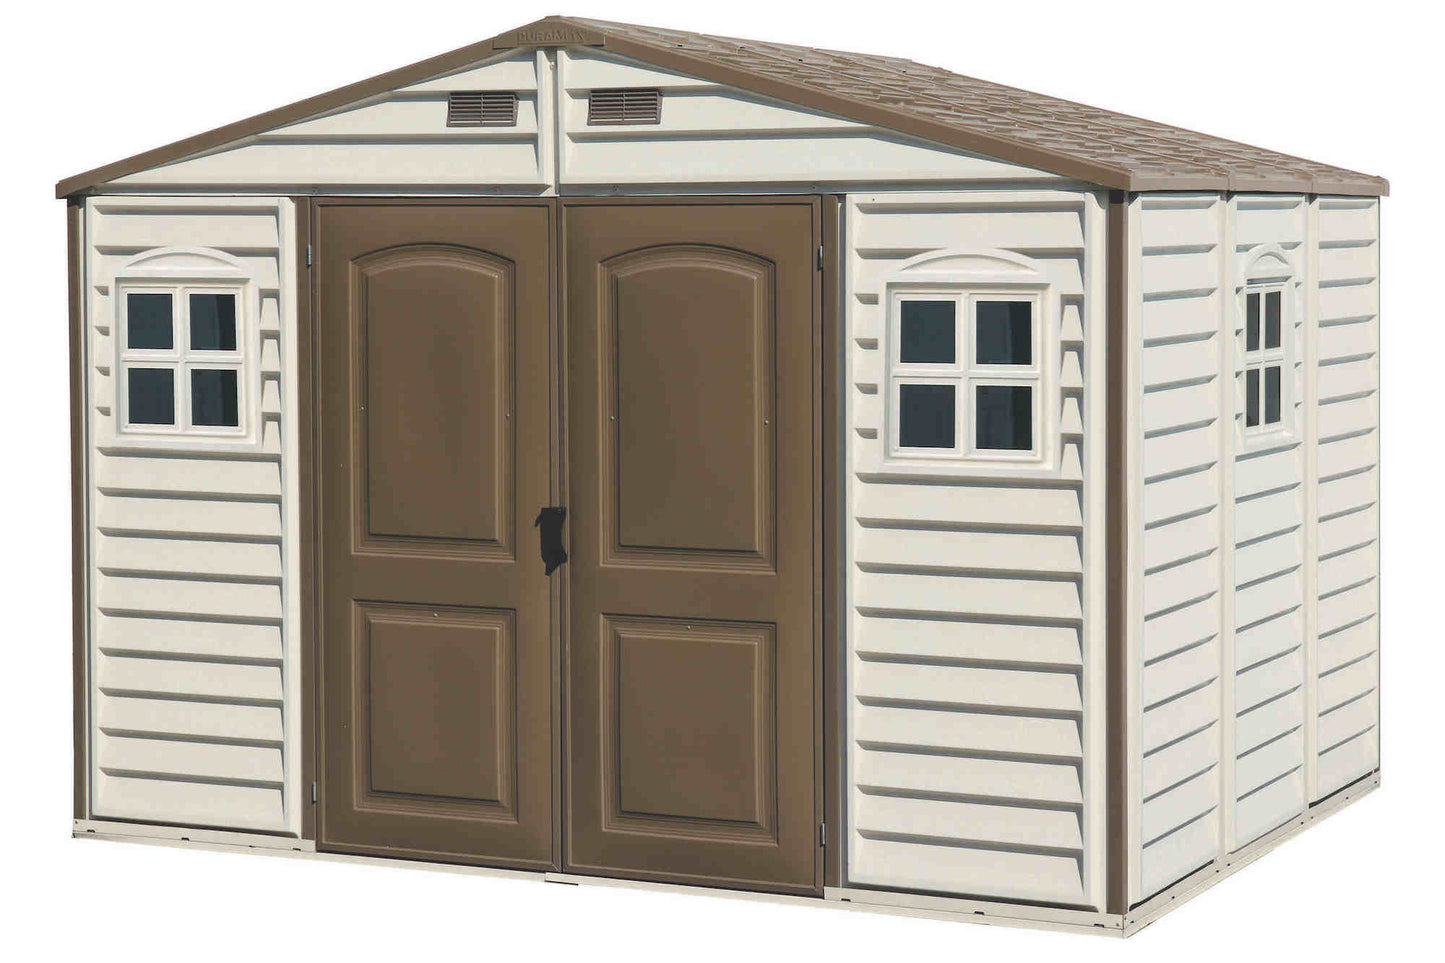 Duramax Woodside 3.19 x 2.40 m plastic storage shed for storing hardware and tools.  